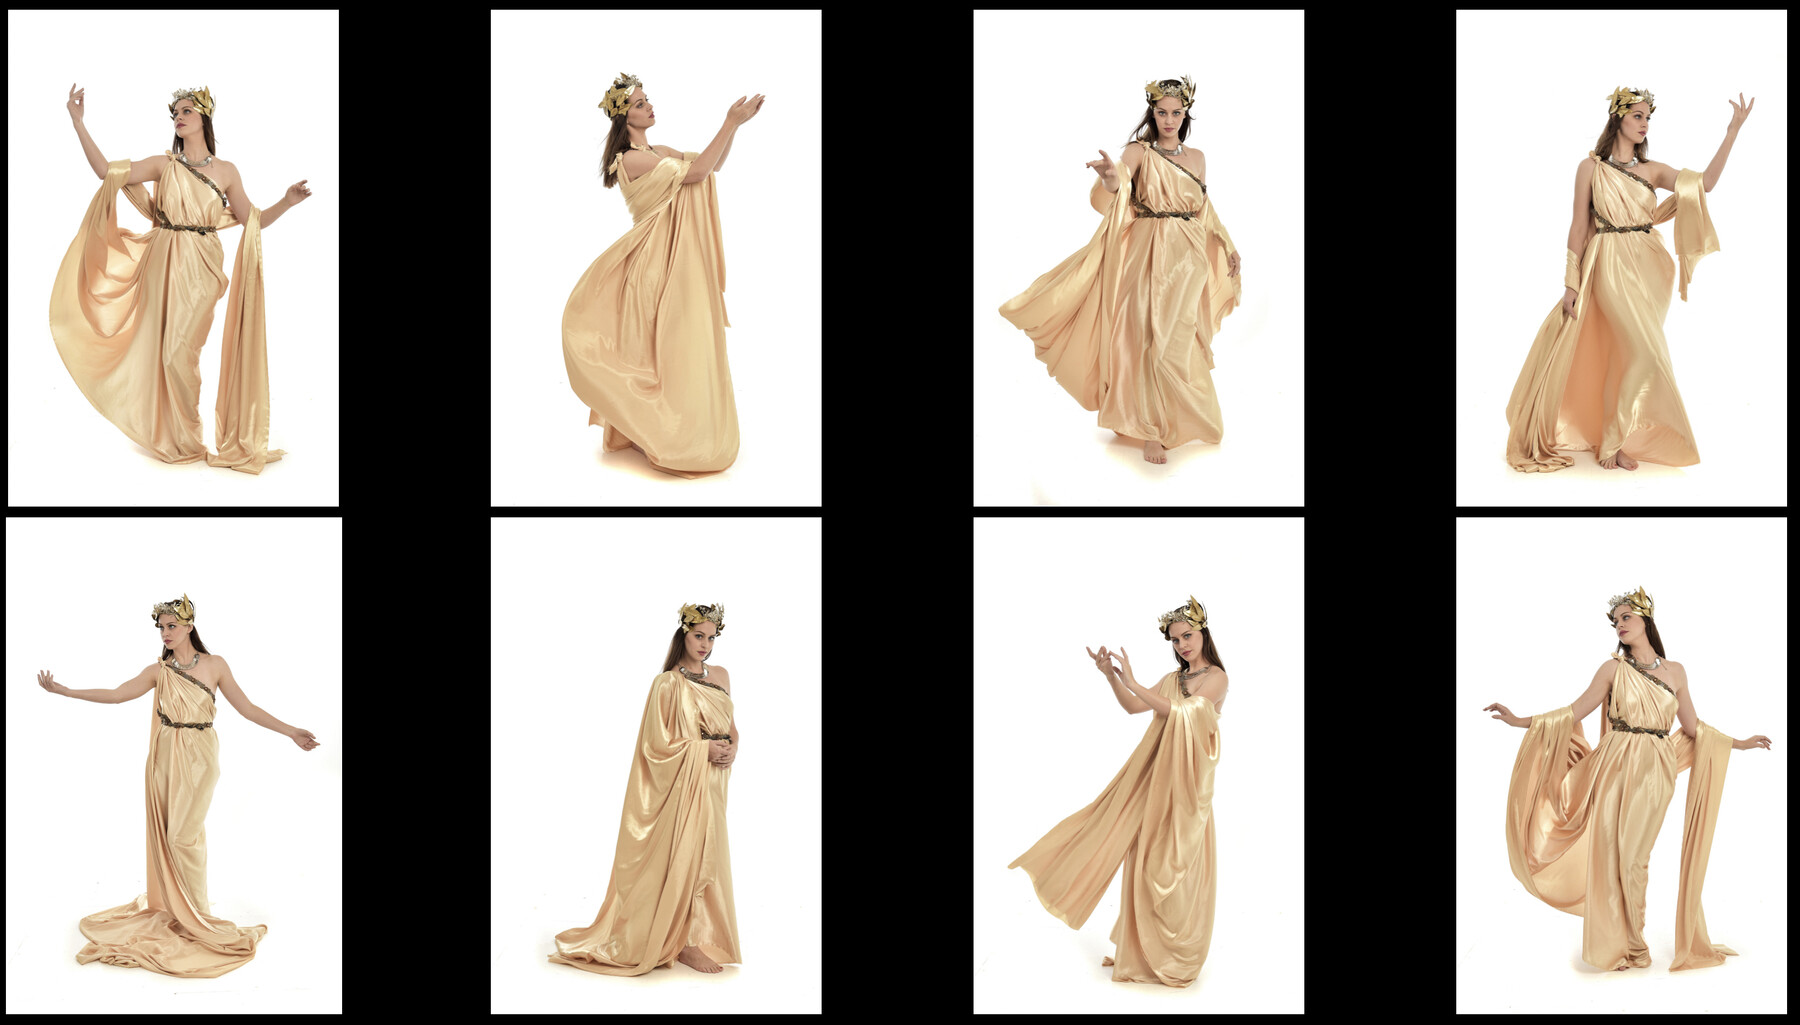 ArtStation x152 Grecian Goddess Pose Reference Pack Resources